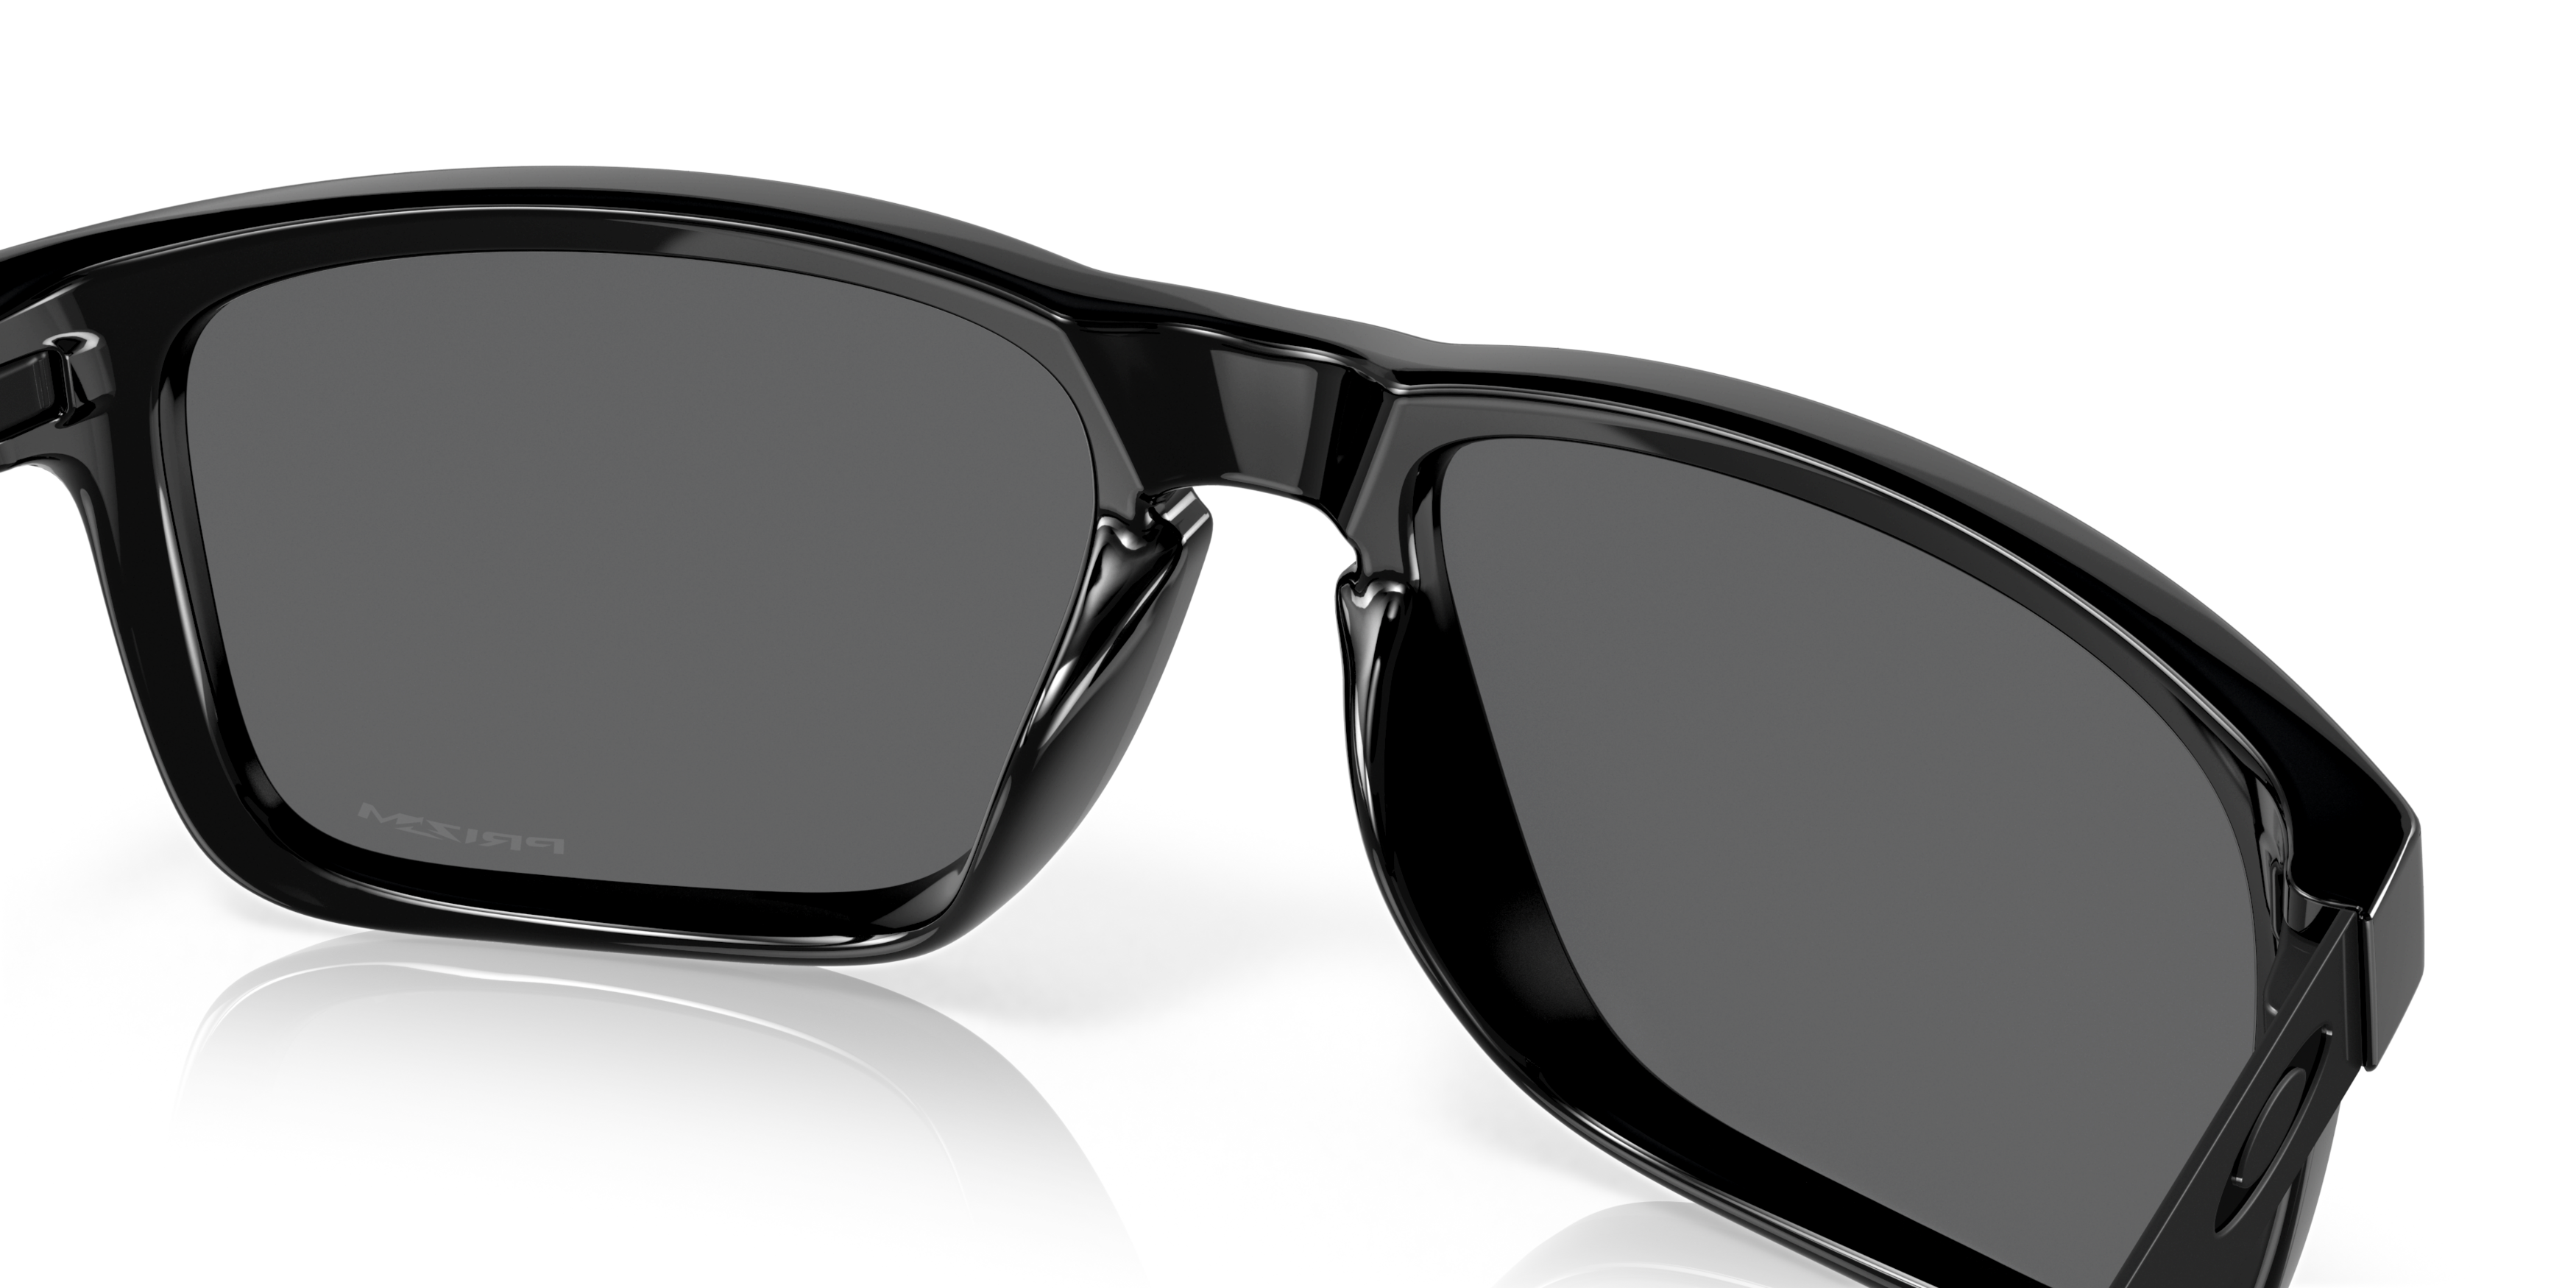 [products.image.detail03] Oakley Holbrook Mix 0OO9384 938406